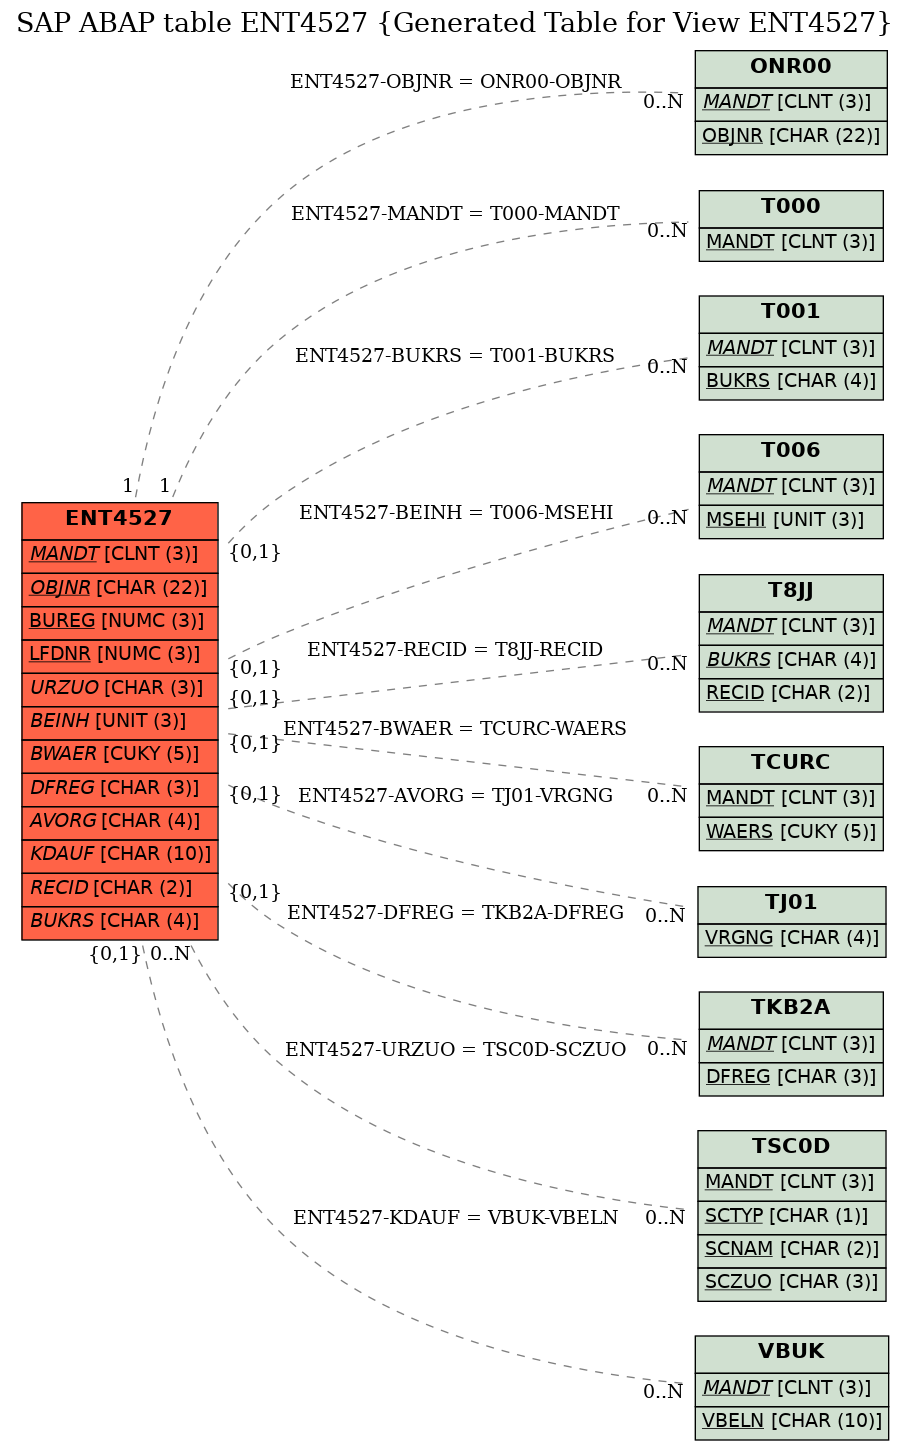 E-R Diagram for table ENT4527 (Generated Table for View ENT4527)